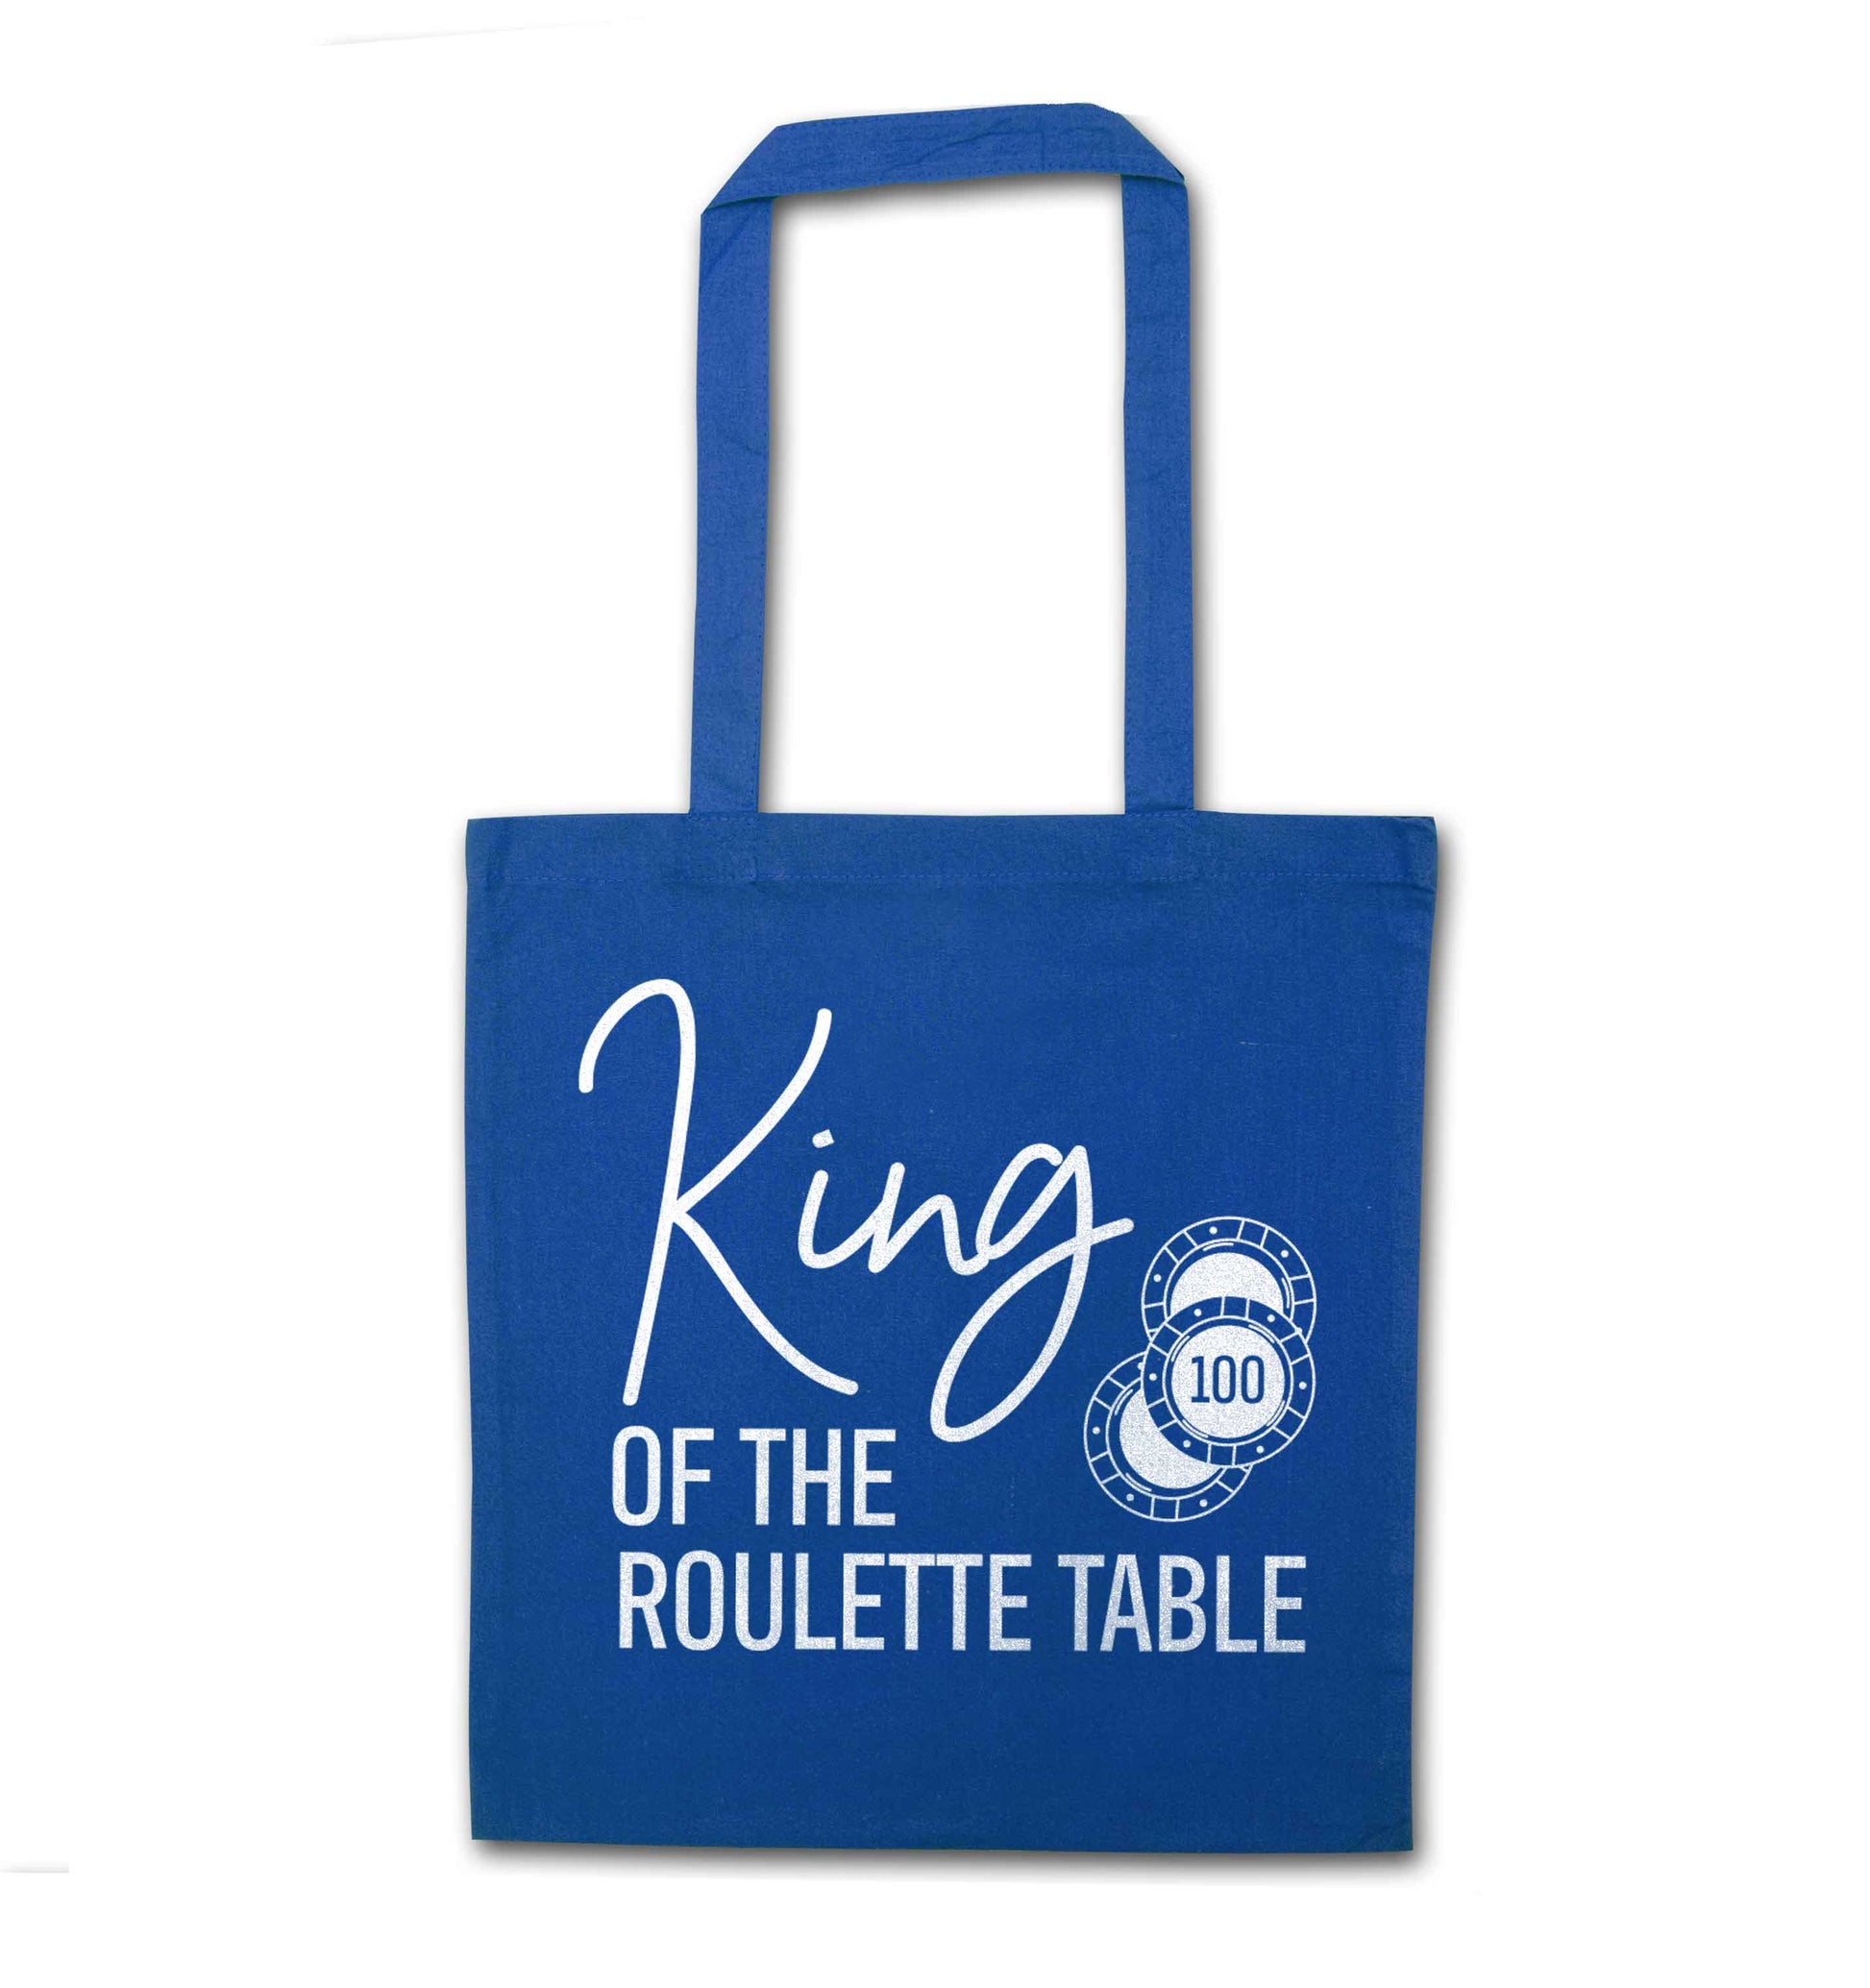 King of the roulette table blue tote bag